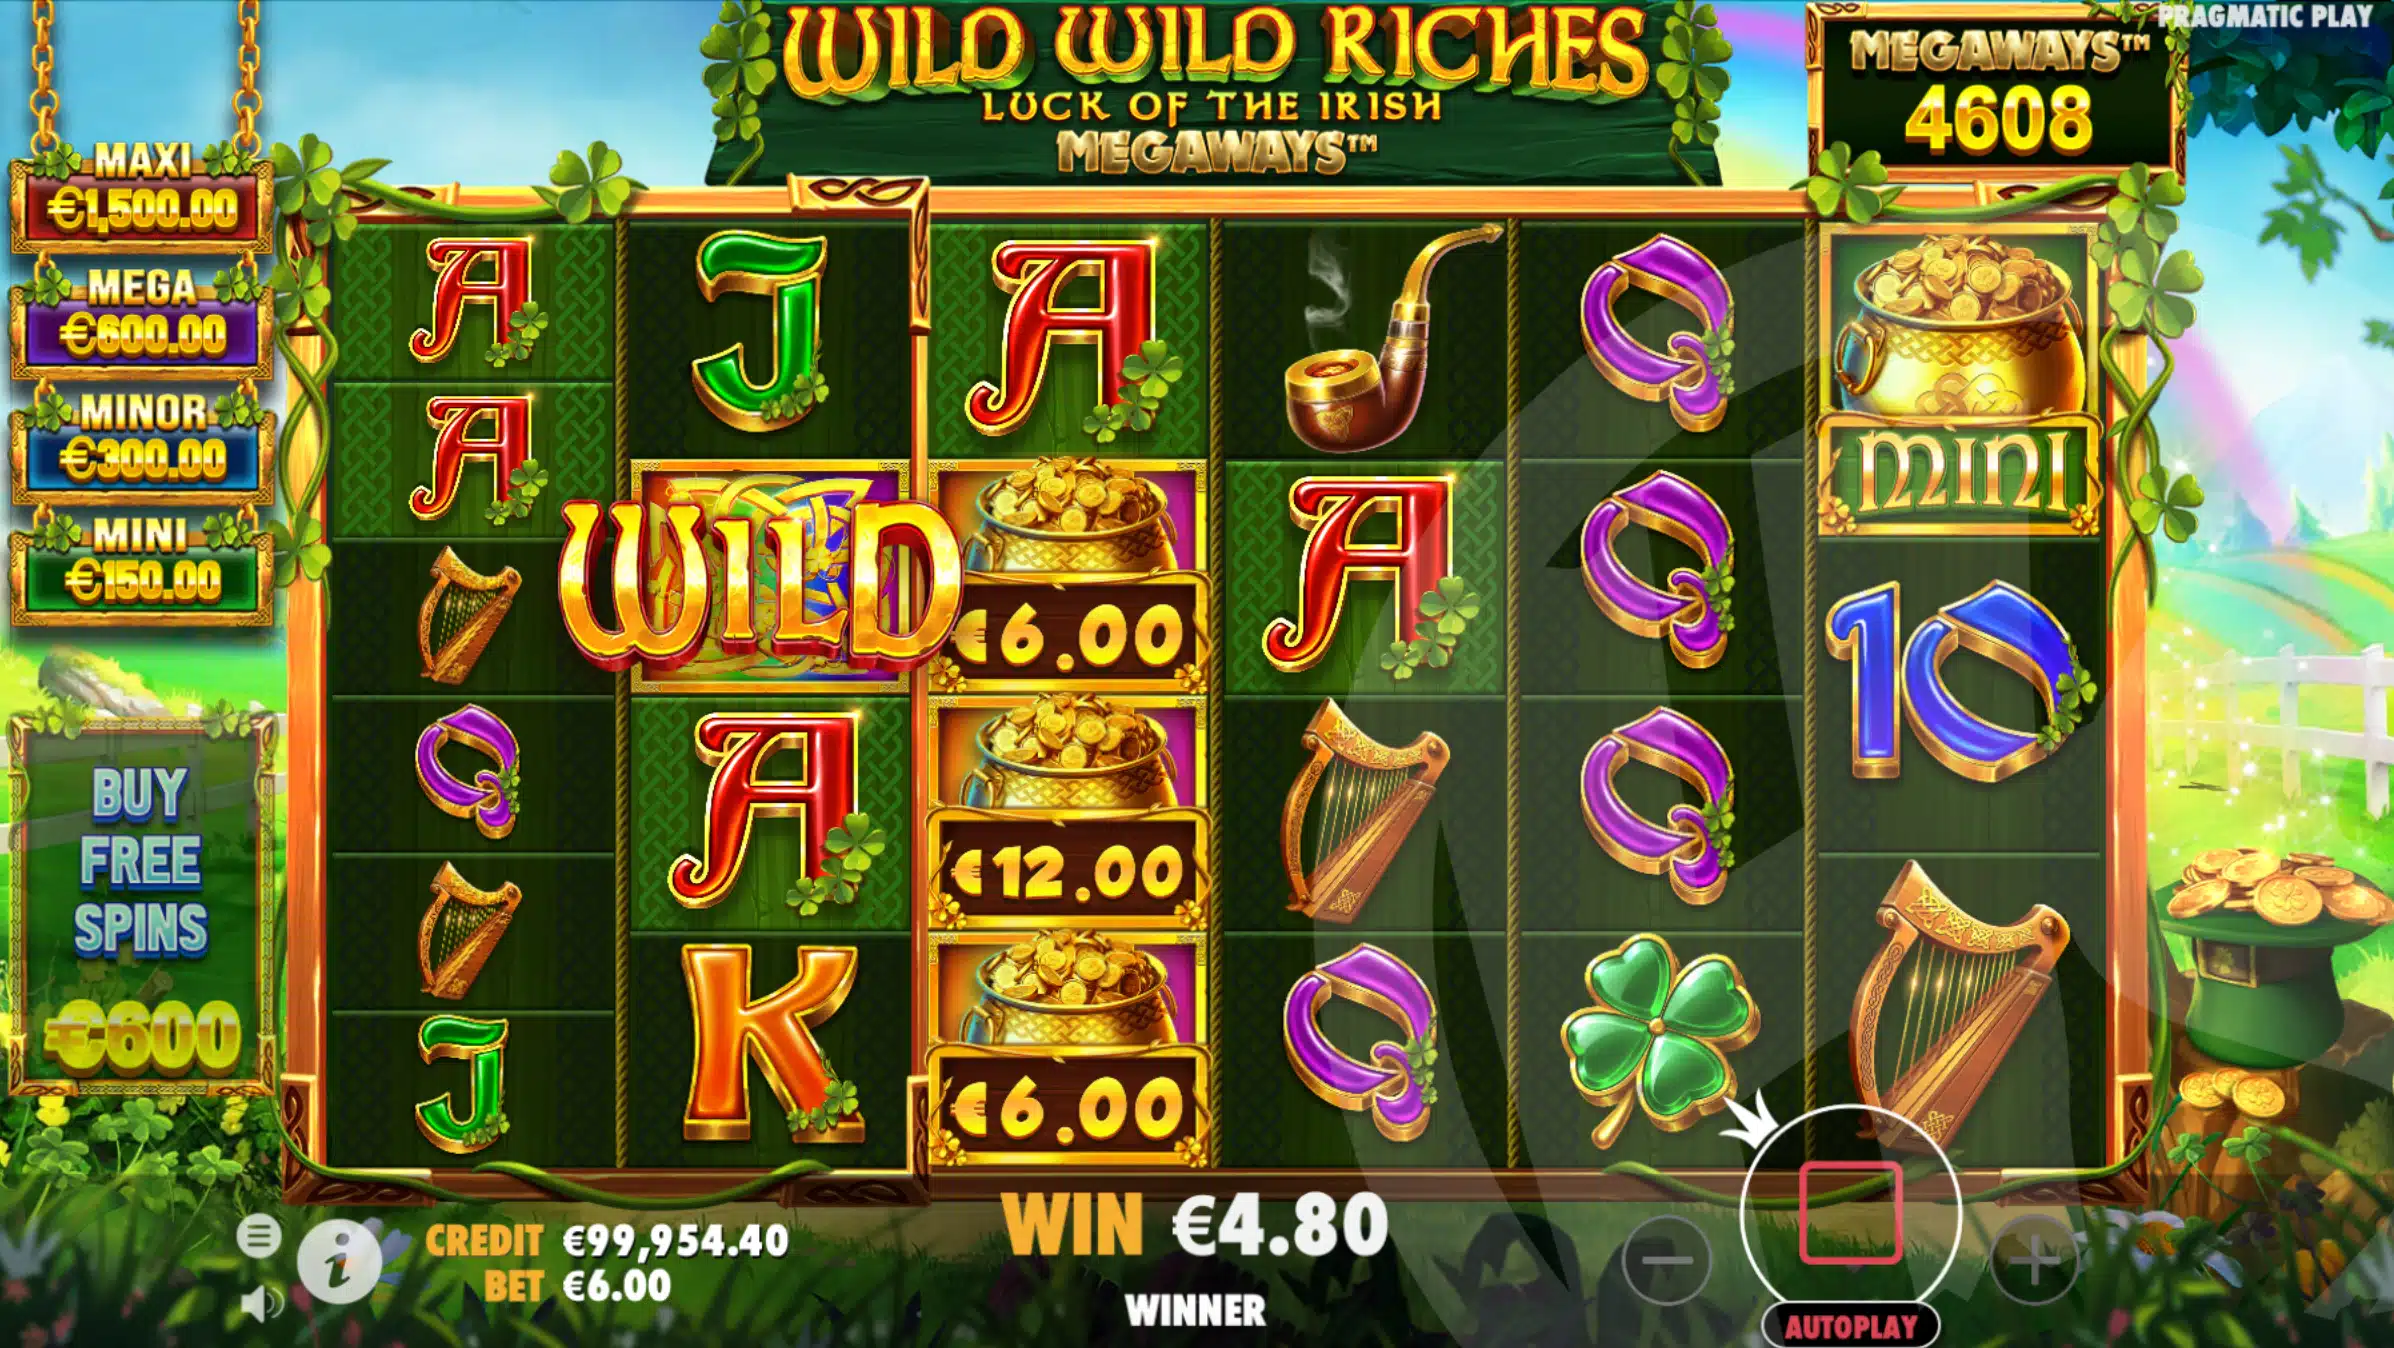 Wild Wild Riches Megaways Offers Players Up To 117,649 Ways to Win